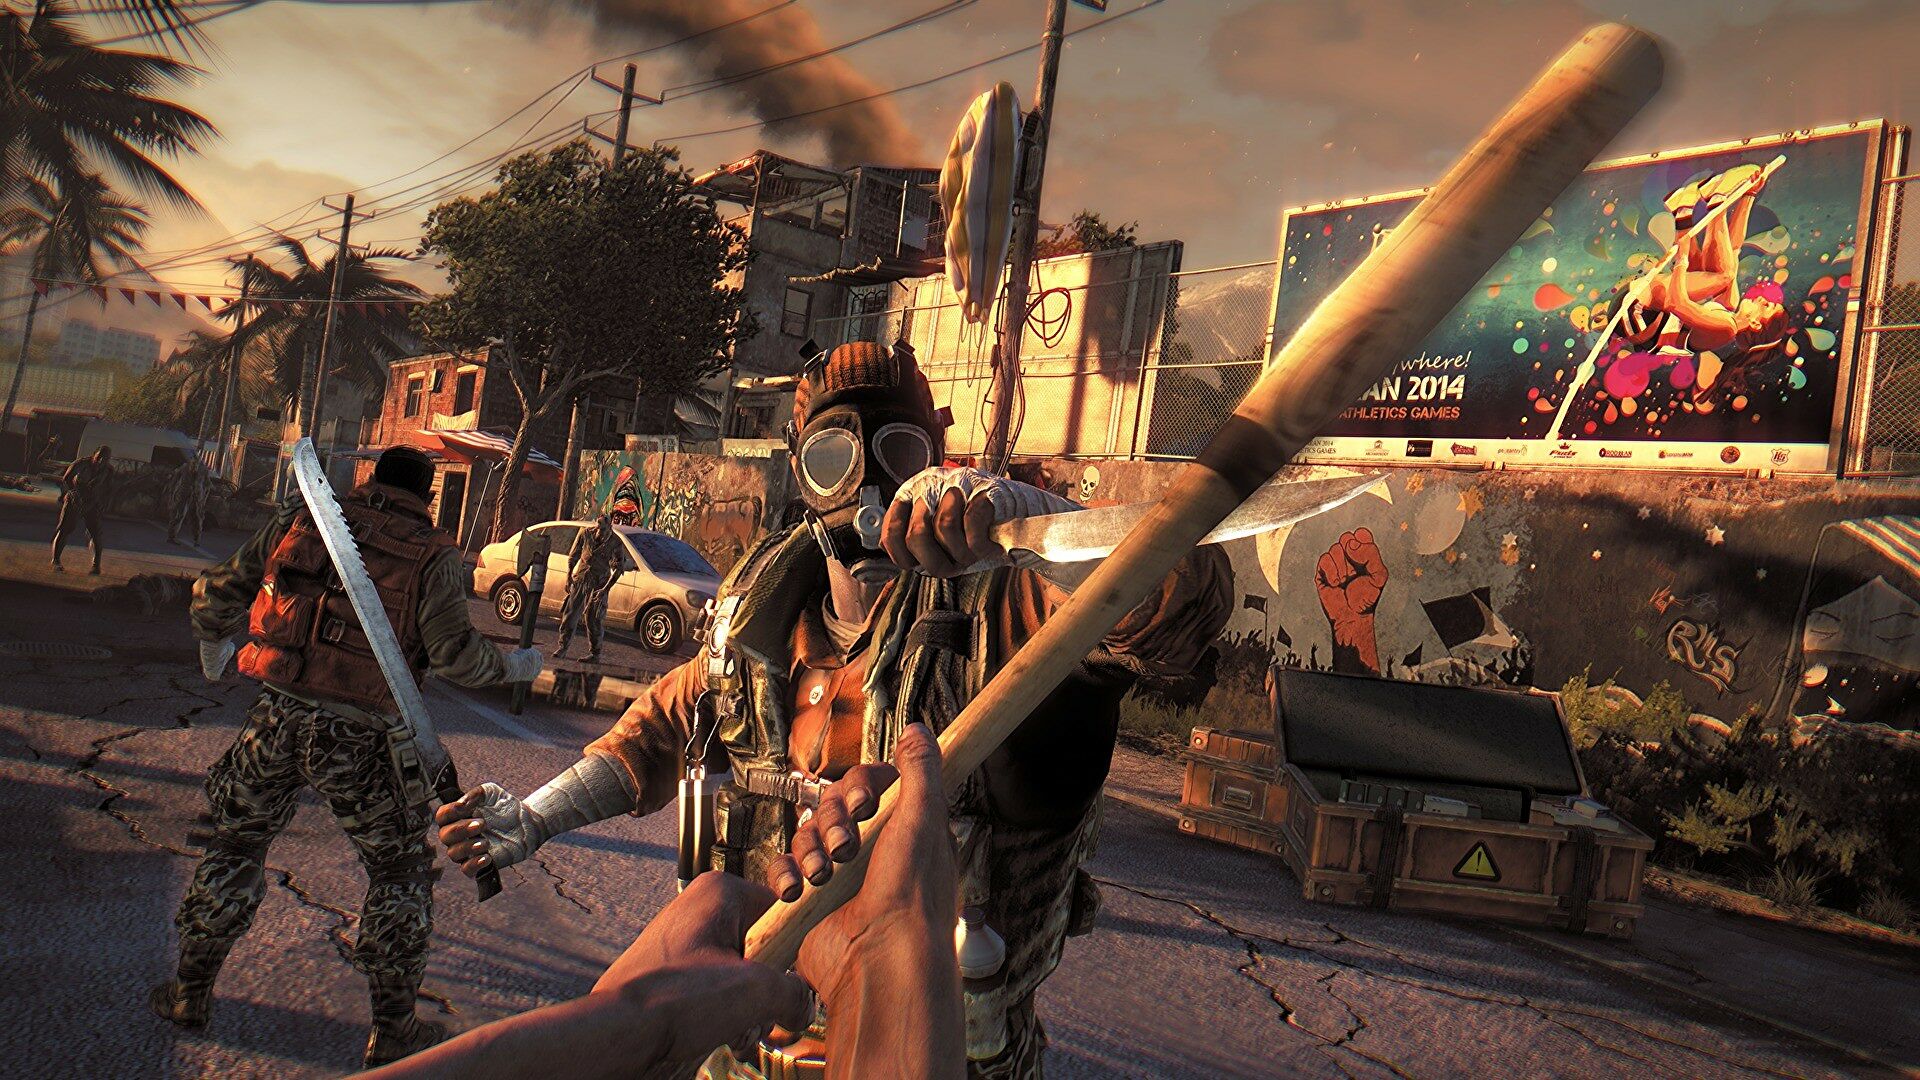 Dying Light says farewell with Definitive Edition – includes 26 DLCs